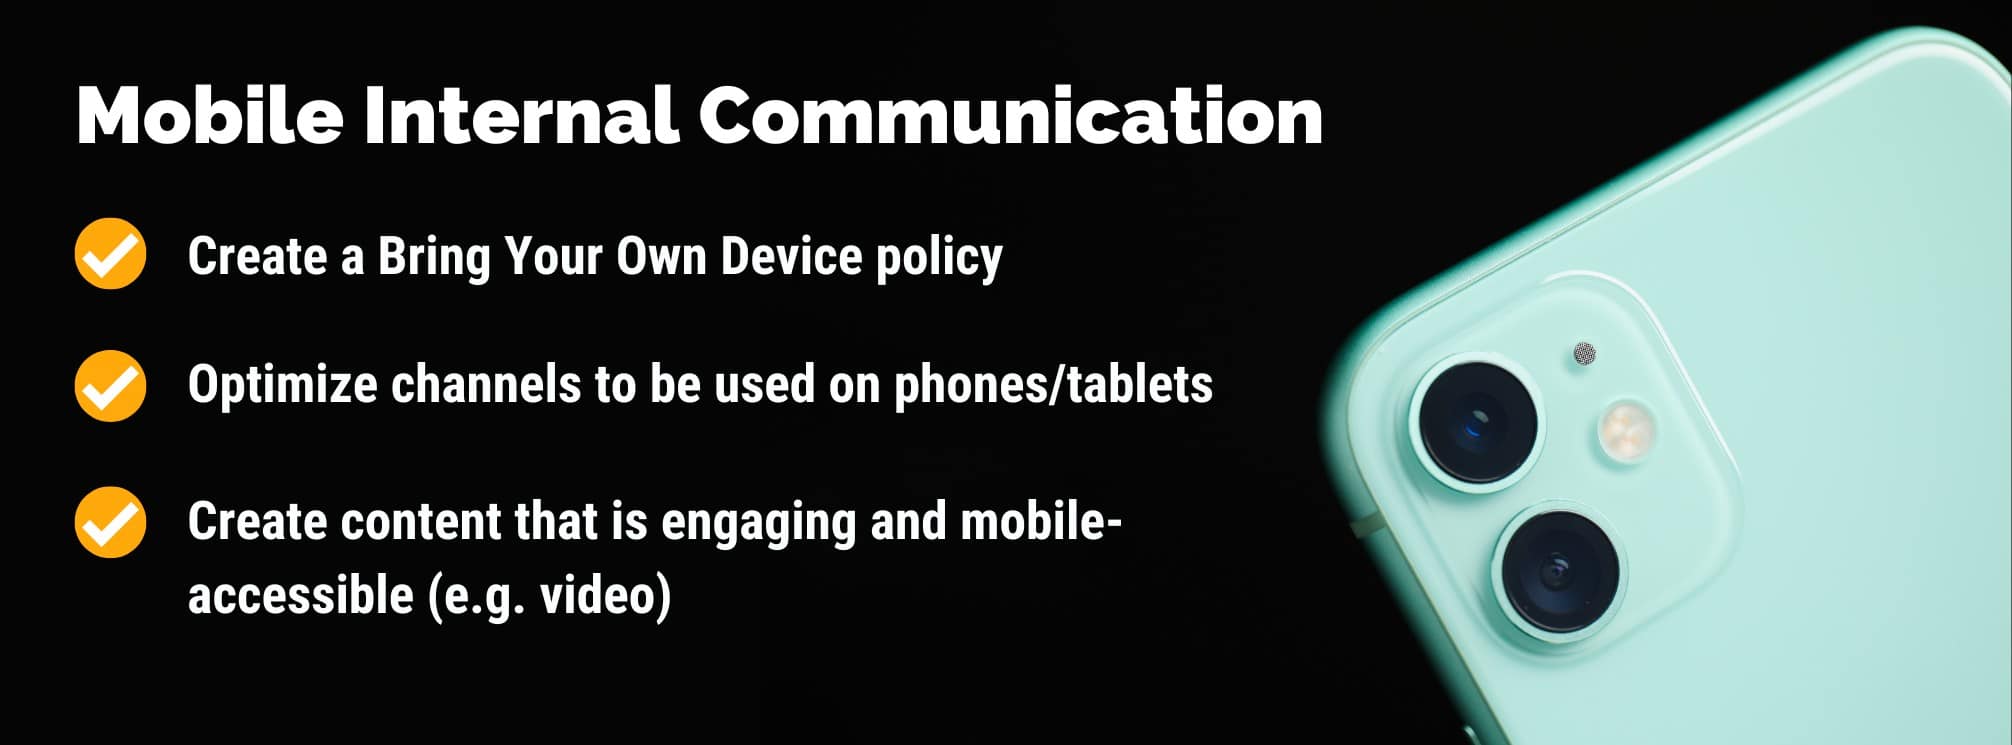 Graphic with a phone in the corner and the words: Mobile Internal Communication:
1. Create a bring your own device policy
2. Optimize channels to be used on phones
3. Create content that is engaging and mobile-accessible